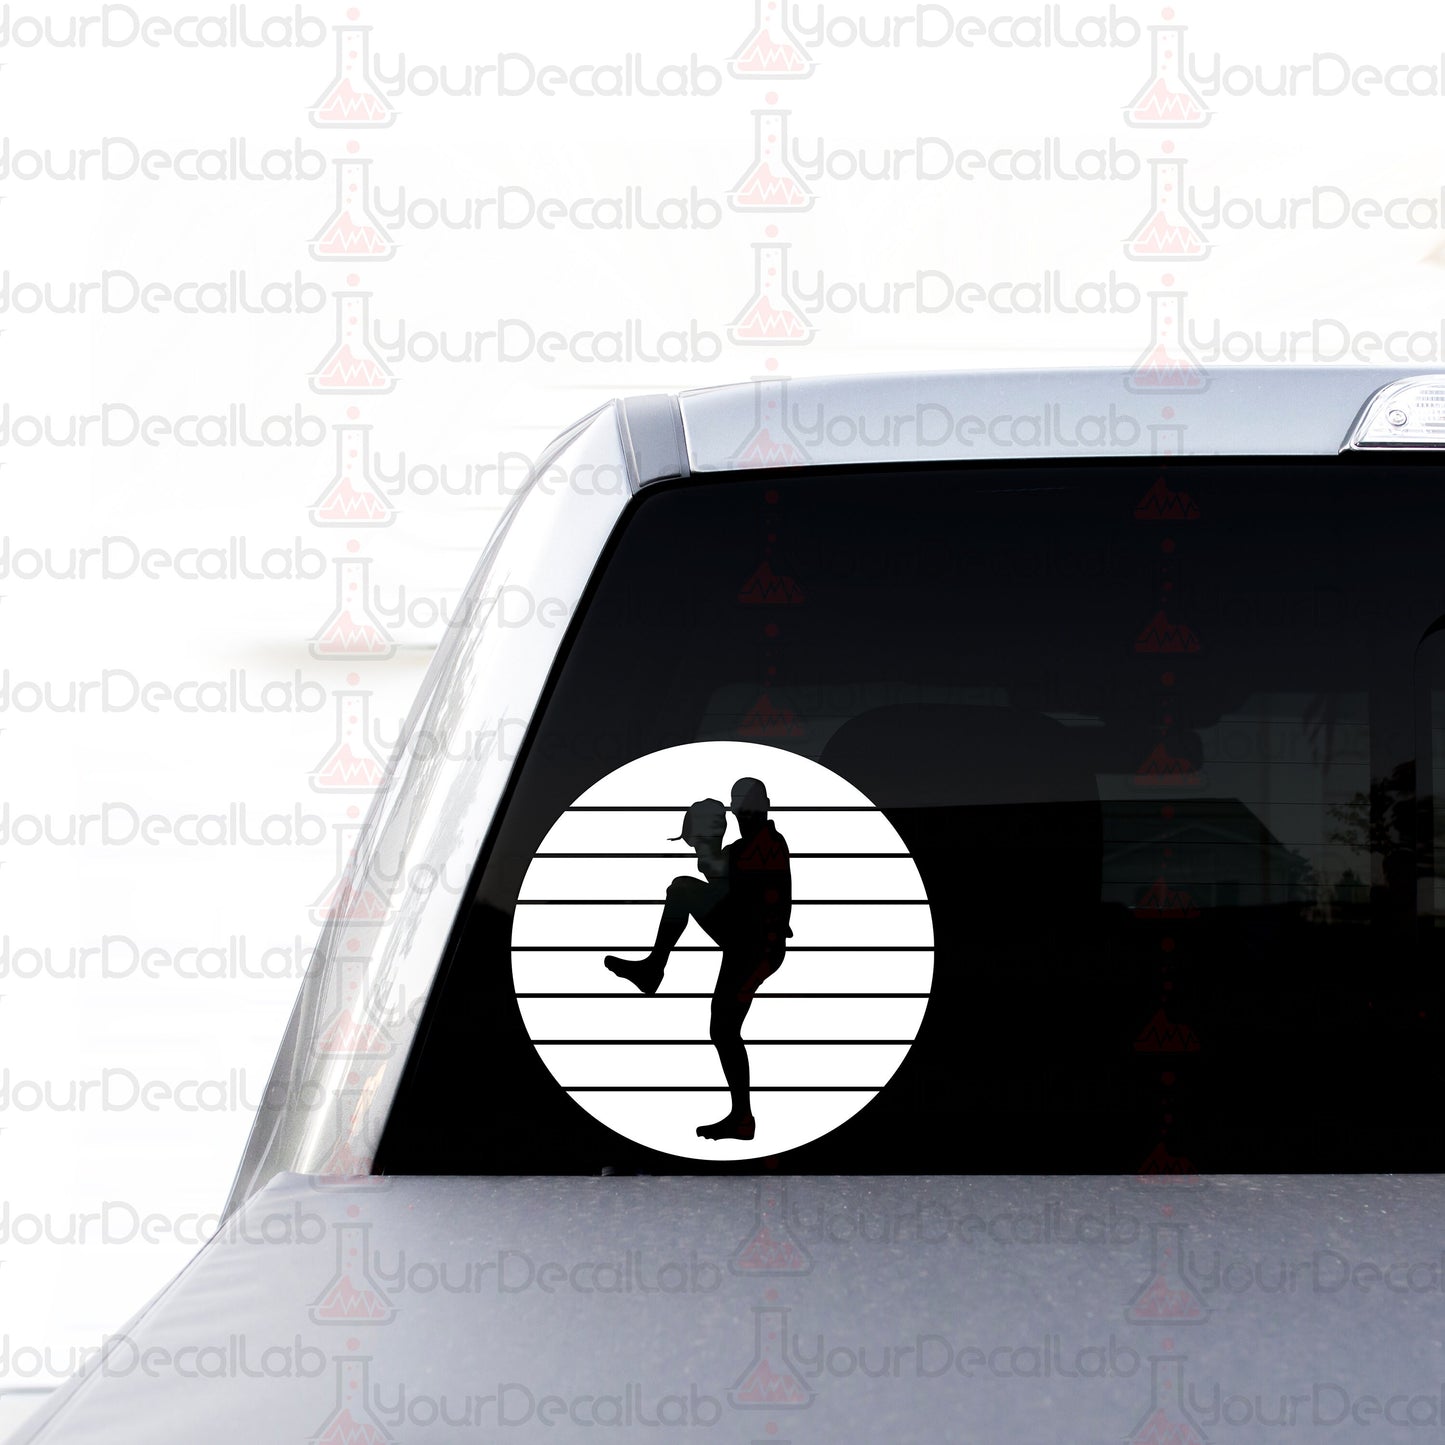 a sticker of a woman running in a circle